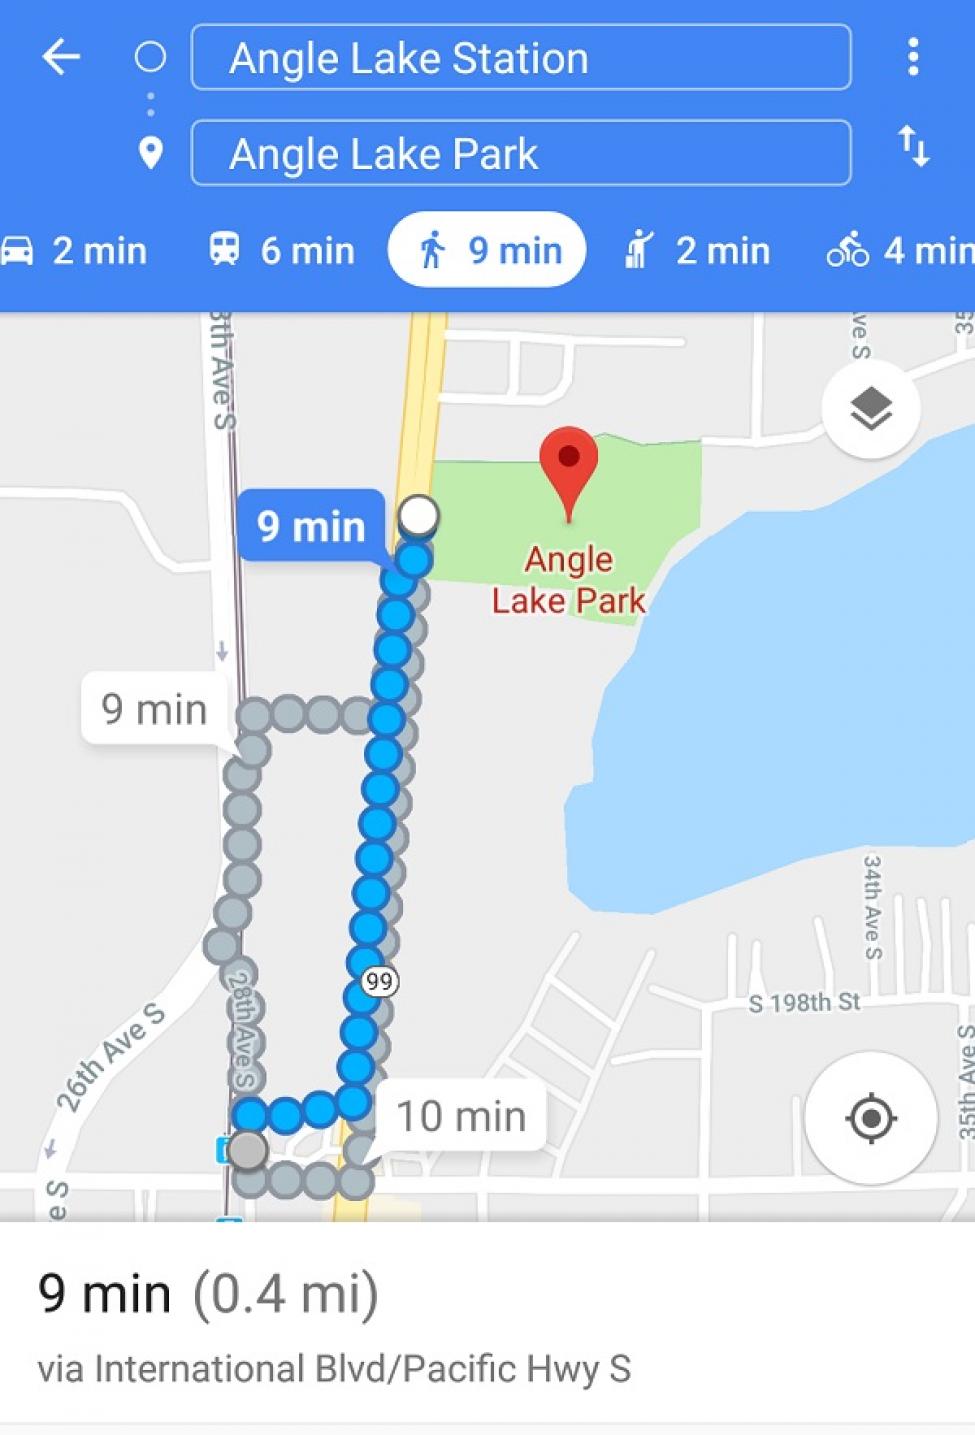 Directions to Angle Lake Park from Link light rail